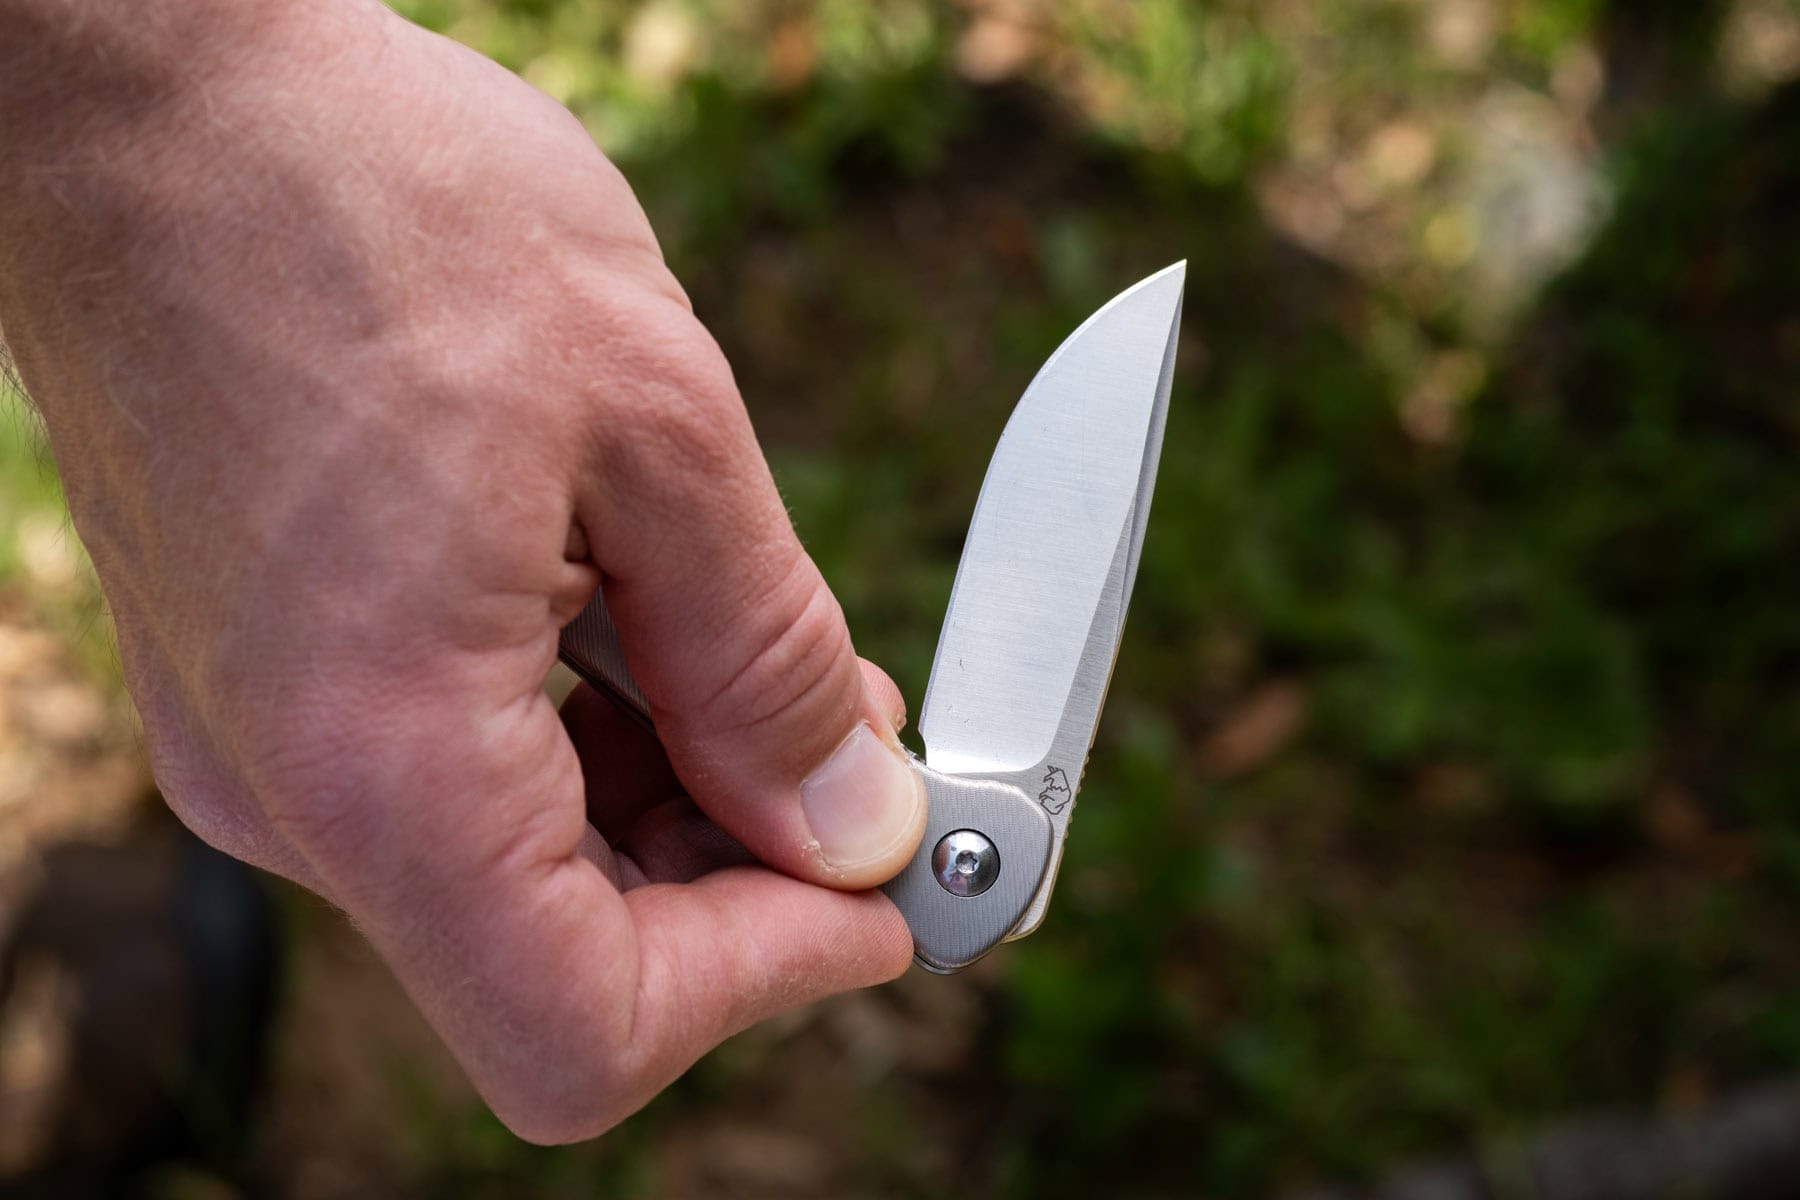 Flipping open the titanium Fast Eddie to show off the snappy action.